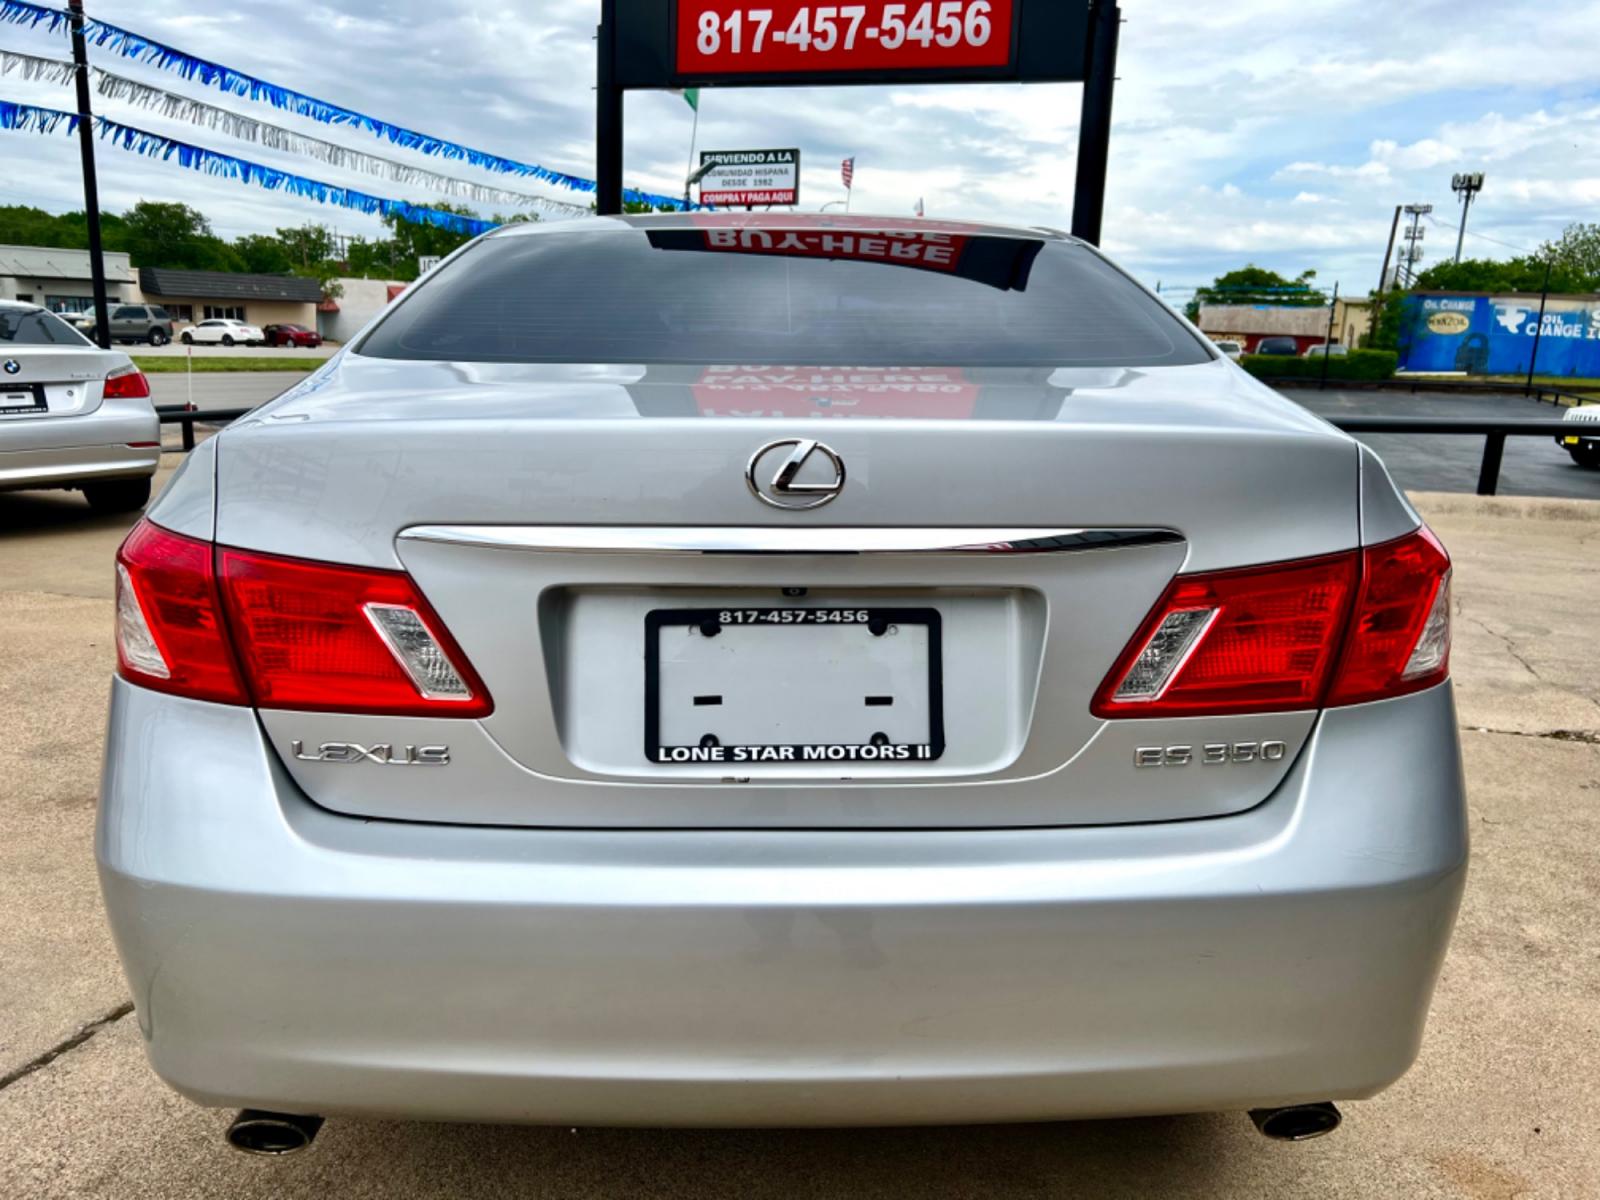 2007 SILVER LEXUS ES 350 BASE (JTHBJ46G072) , located at 5900 E. Lancaster Ave., Fort Worth, TX, 76112, (817) 457-5456, 0.000000, 0.000000 - CASH CAR ONLY, NO FINANCING AVAILABLE. WE'VE SLASHED THE PRICE! NOW ONLY $5,391! THIS 2007 LEXUS ES 350 BASE 4 DOOR SEDAN RUNS AND DRIVES GREAT. IT IS EQUIPPED WITH A CD PLAYER, AM/FM RADIO AND AN AUX PORT. THE TIRES ARE IN GOOD CONDITION AND STILL HAVE TREAD LEFT ON THEM. THIS CAR WILL NOT LAST S - Photo #4